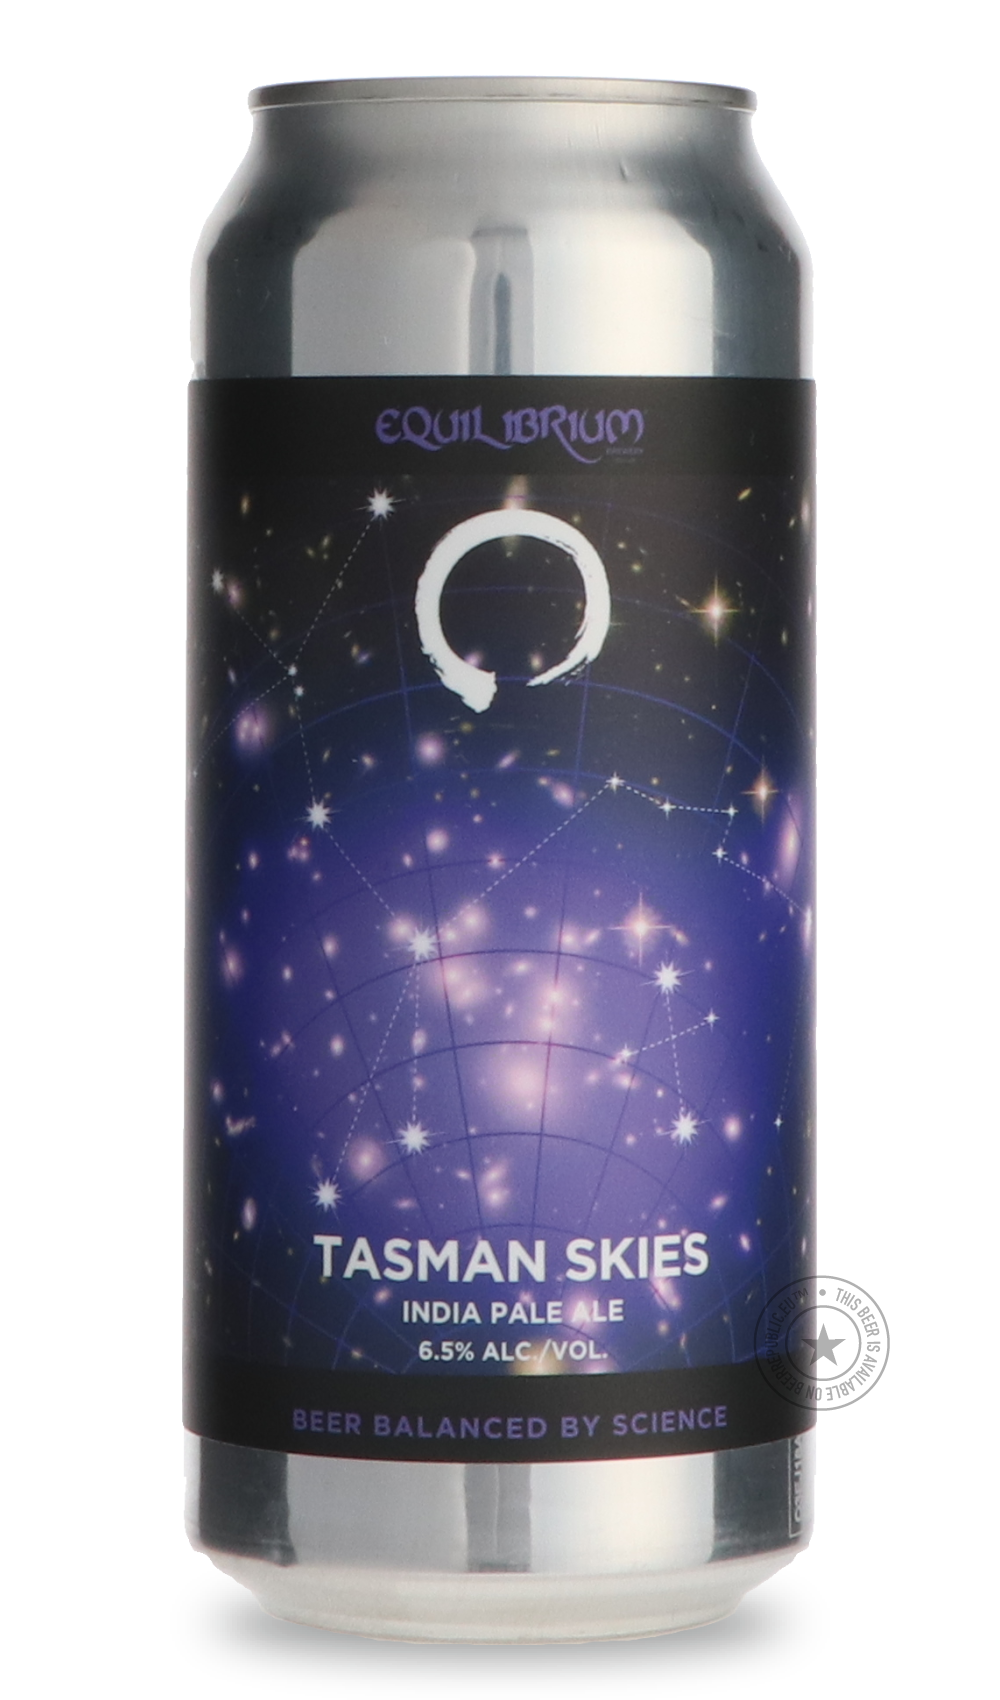 -Equilibrium- Tasman Skies-IPA- Only @ Beer Republic - The best online beer store for American & Canadian craft beer - Buy beer online from the USA and Canada - Bier online kopen - Amerikaans bier kopen - Craft beer store - Craft beer kopen - Amerikanisch bier kaufen - Bier online kaufen - Acheter biere online - IPA - Stout - Porter - New England IPA - Hazy IPA - Imperial Stout - Barrel Aged - Barrel Aged Imperial Stout - Brown - Dark beer - Blond - Blonde - Pilsner - Lager - Wheat - Weizen - Amber - Barley